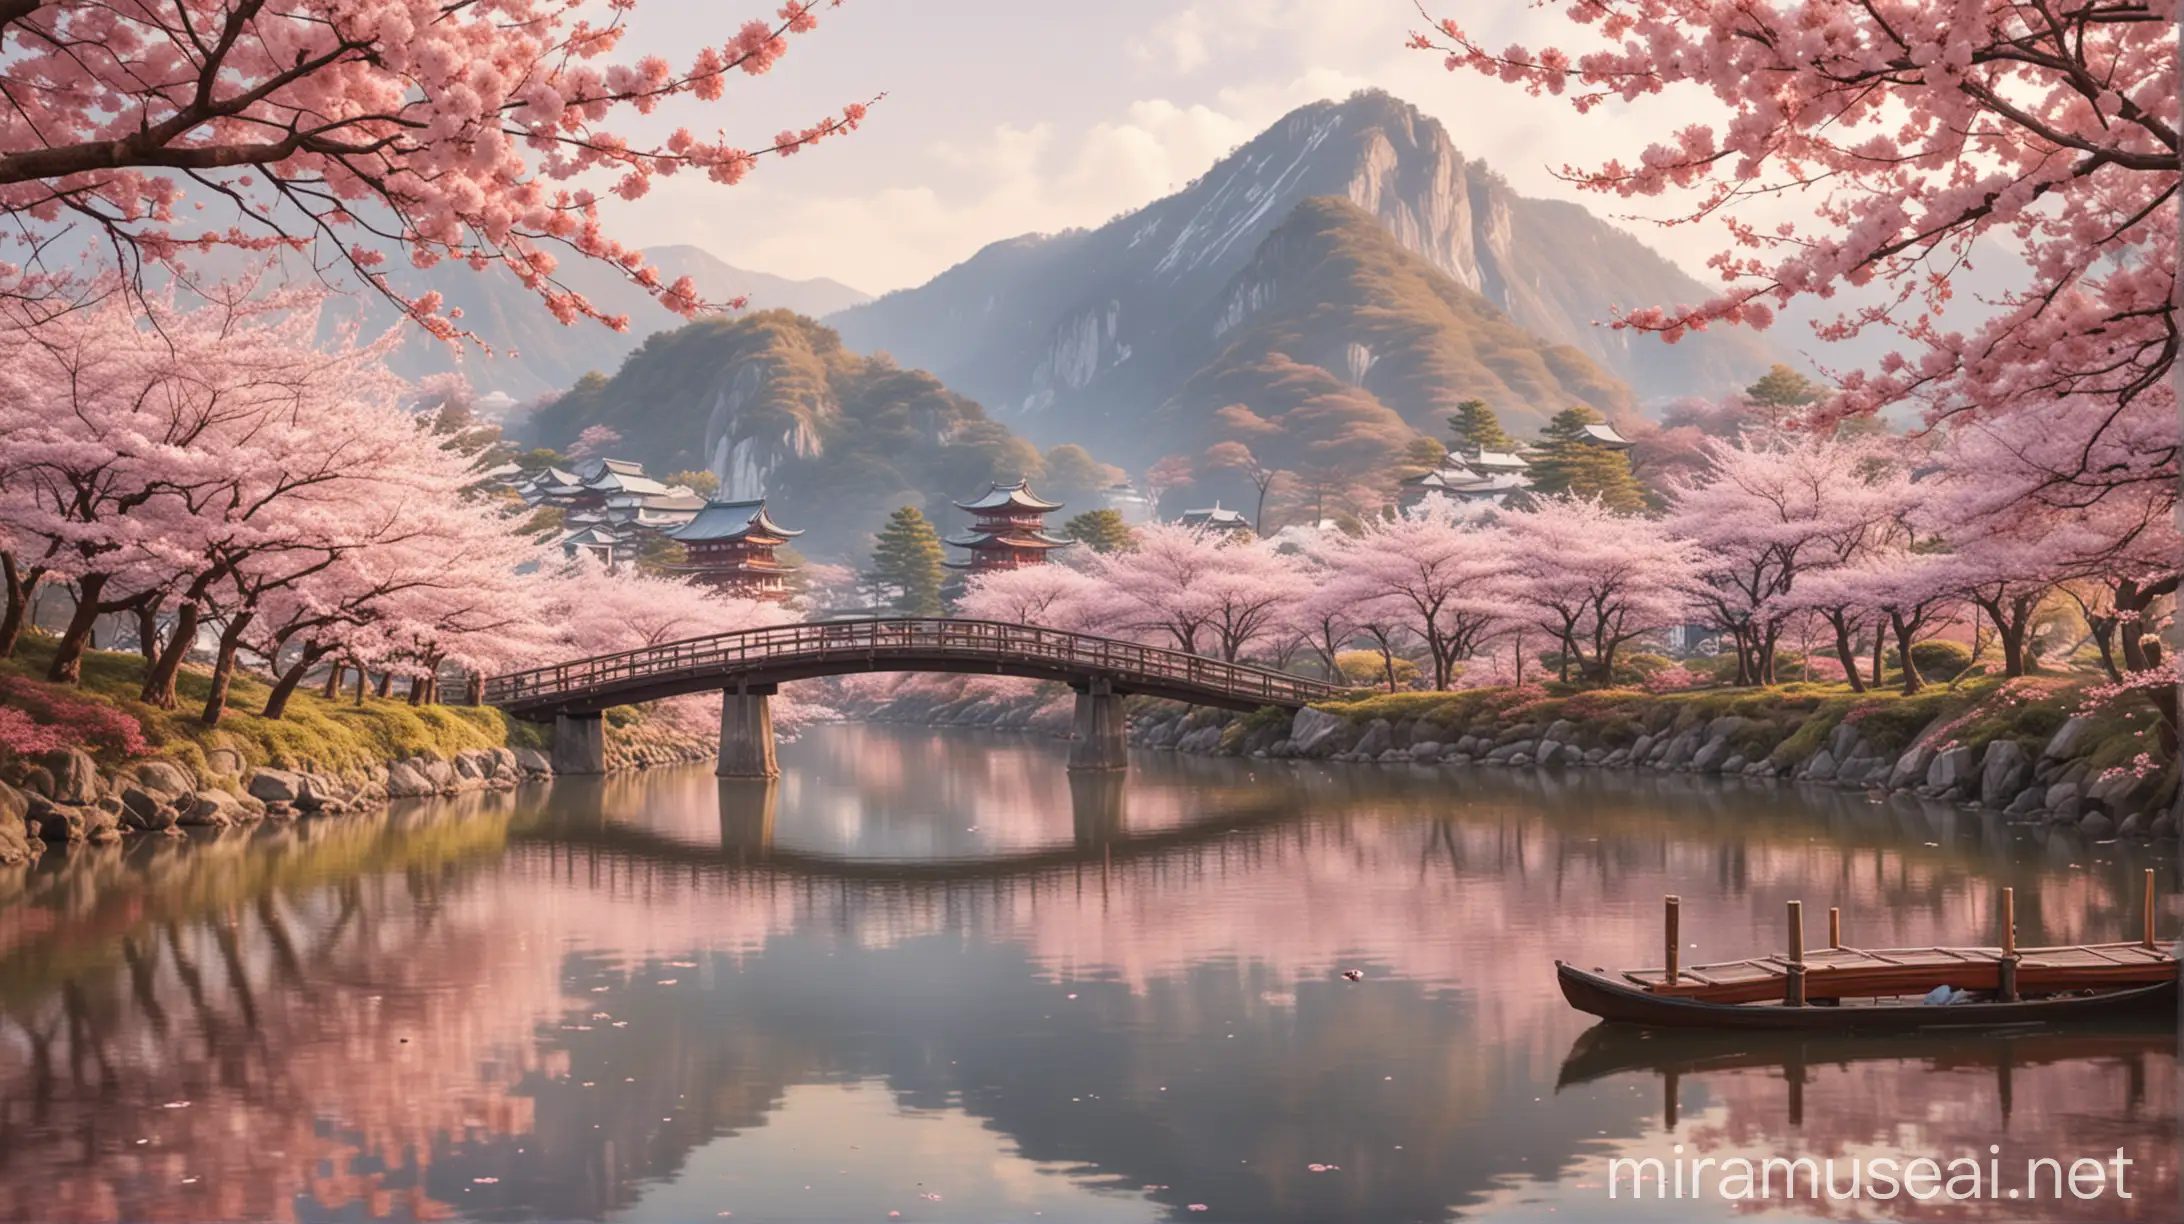 Create an 8k resolution wallpaper image of cherry blossoms in spring in Japan. Use a delicate watercolor theme to capture the ethereal beauty and tranquility of the scene. The image should showcase cherry blossom trees in full bloom, with soft pink and white petals. Include elements of traditional Japanese landscape, such as a serene river, gently flowing beneath the cherry blossoms, and a classic Japanese bridge in the background. The colors should be soft and pastel, with a dreamy, almost magical quality. The overall composition should evoke a sense of peace and natural beauty, perfect for a wallpaper.